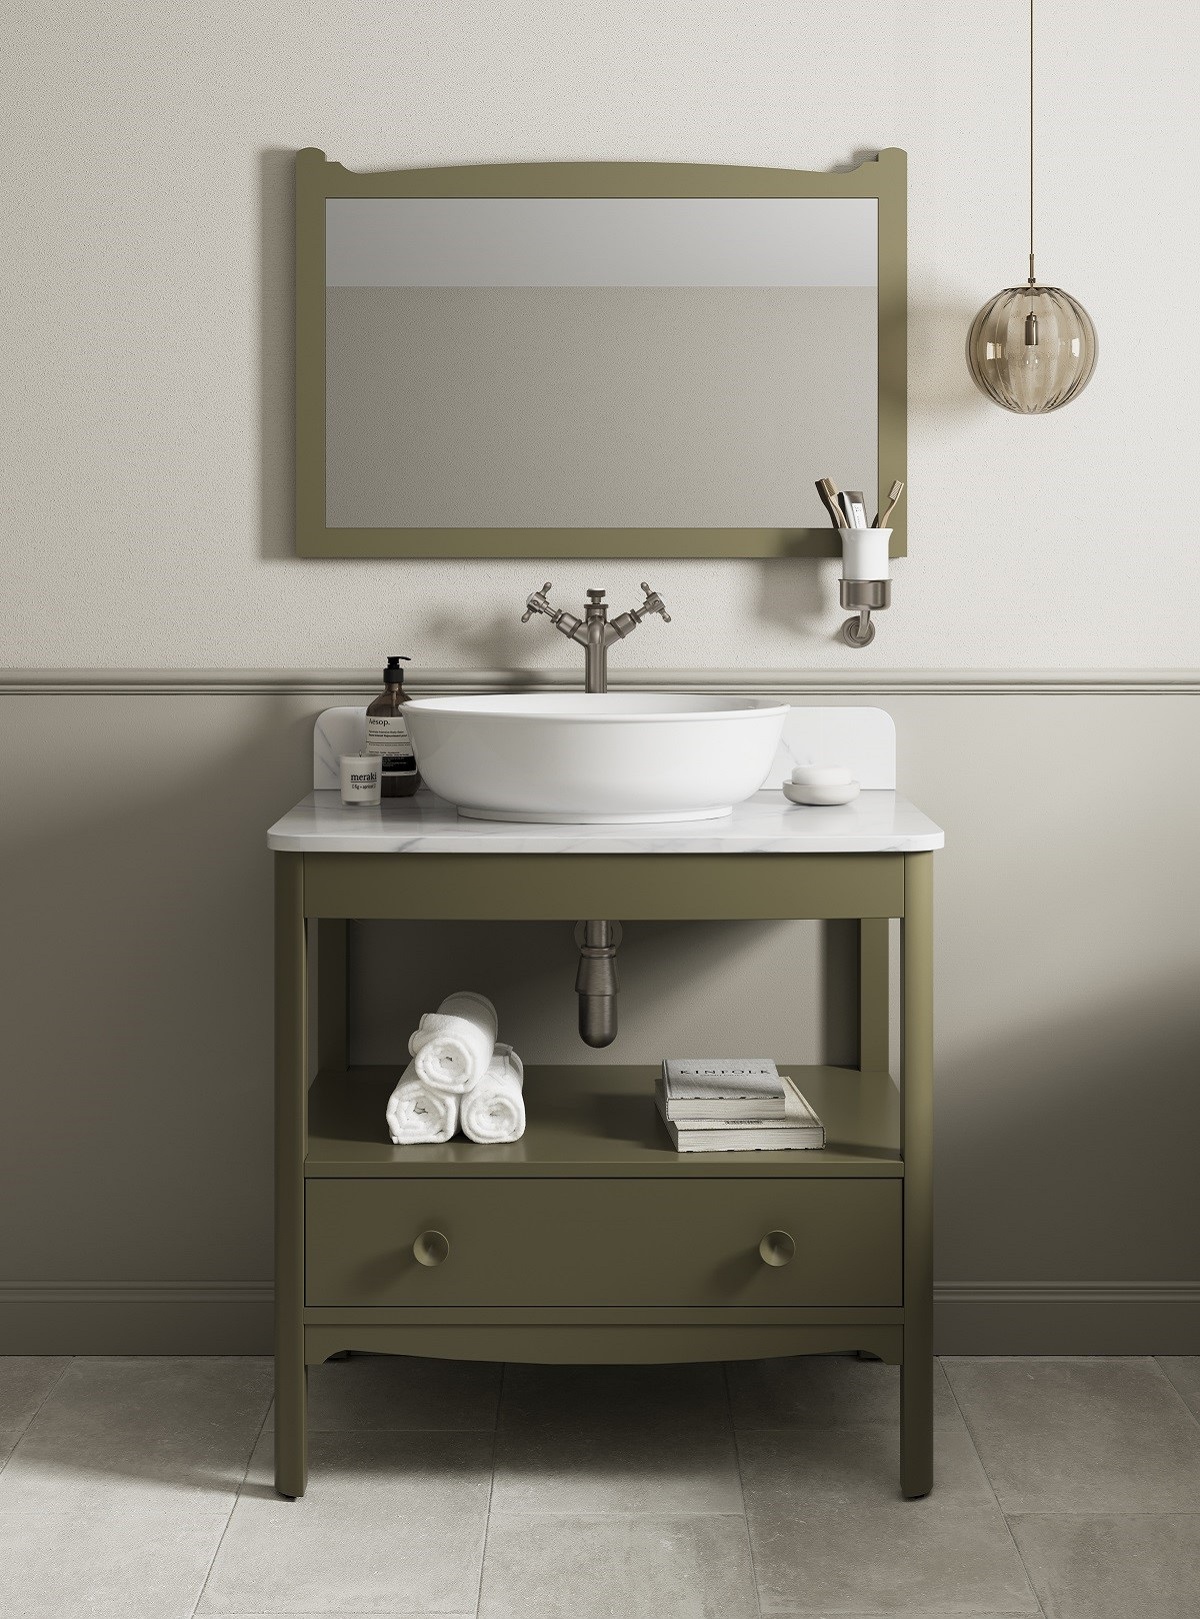 olive green period style bathroom furniture with basin and mirror